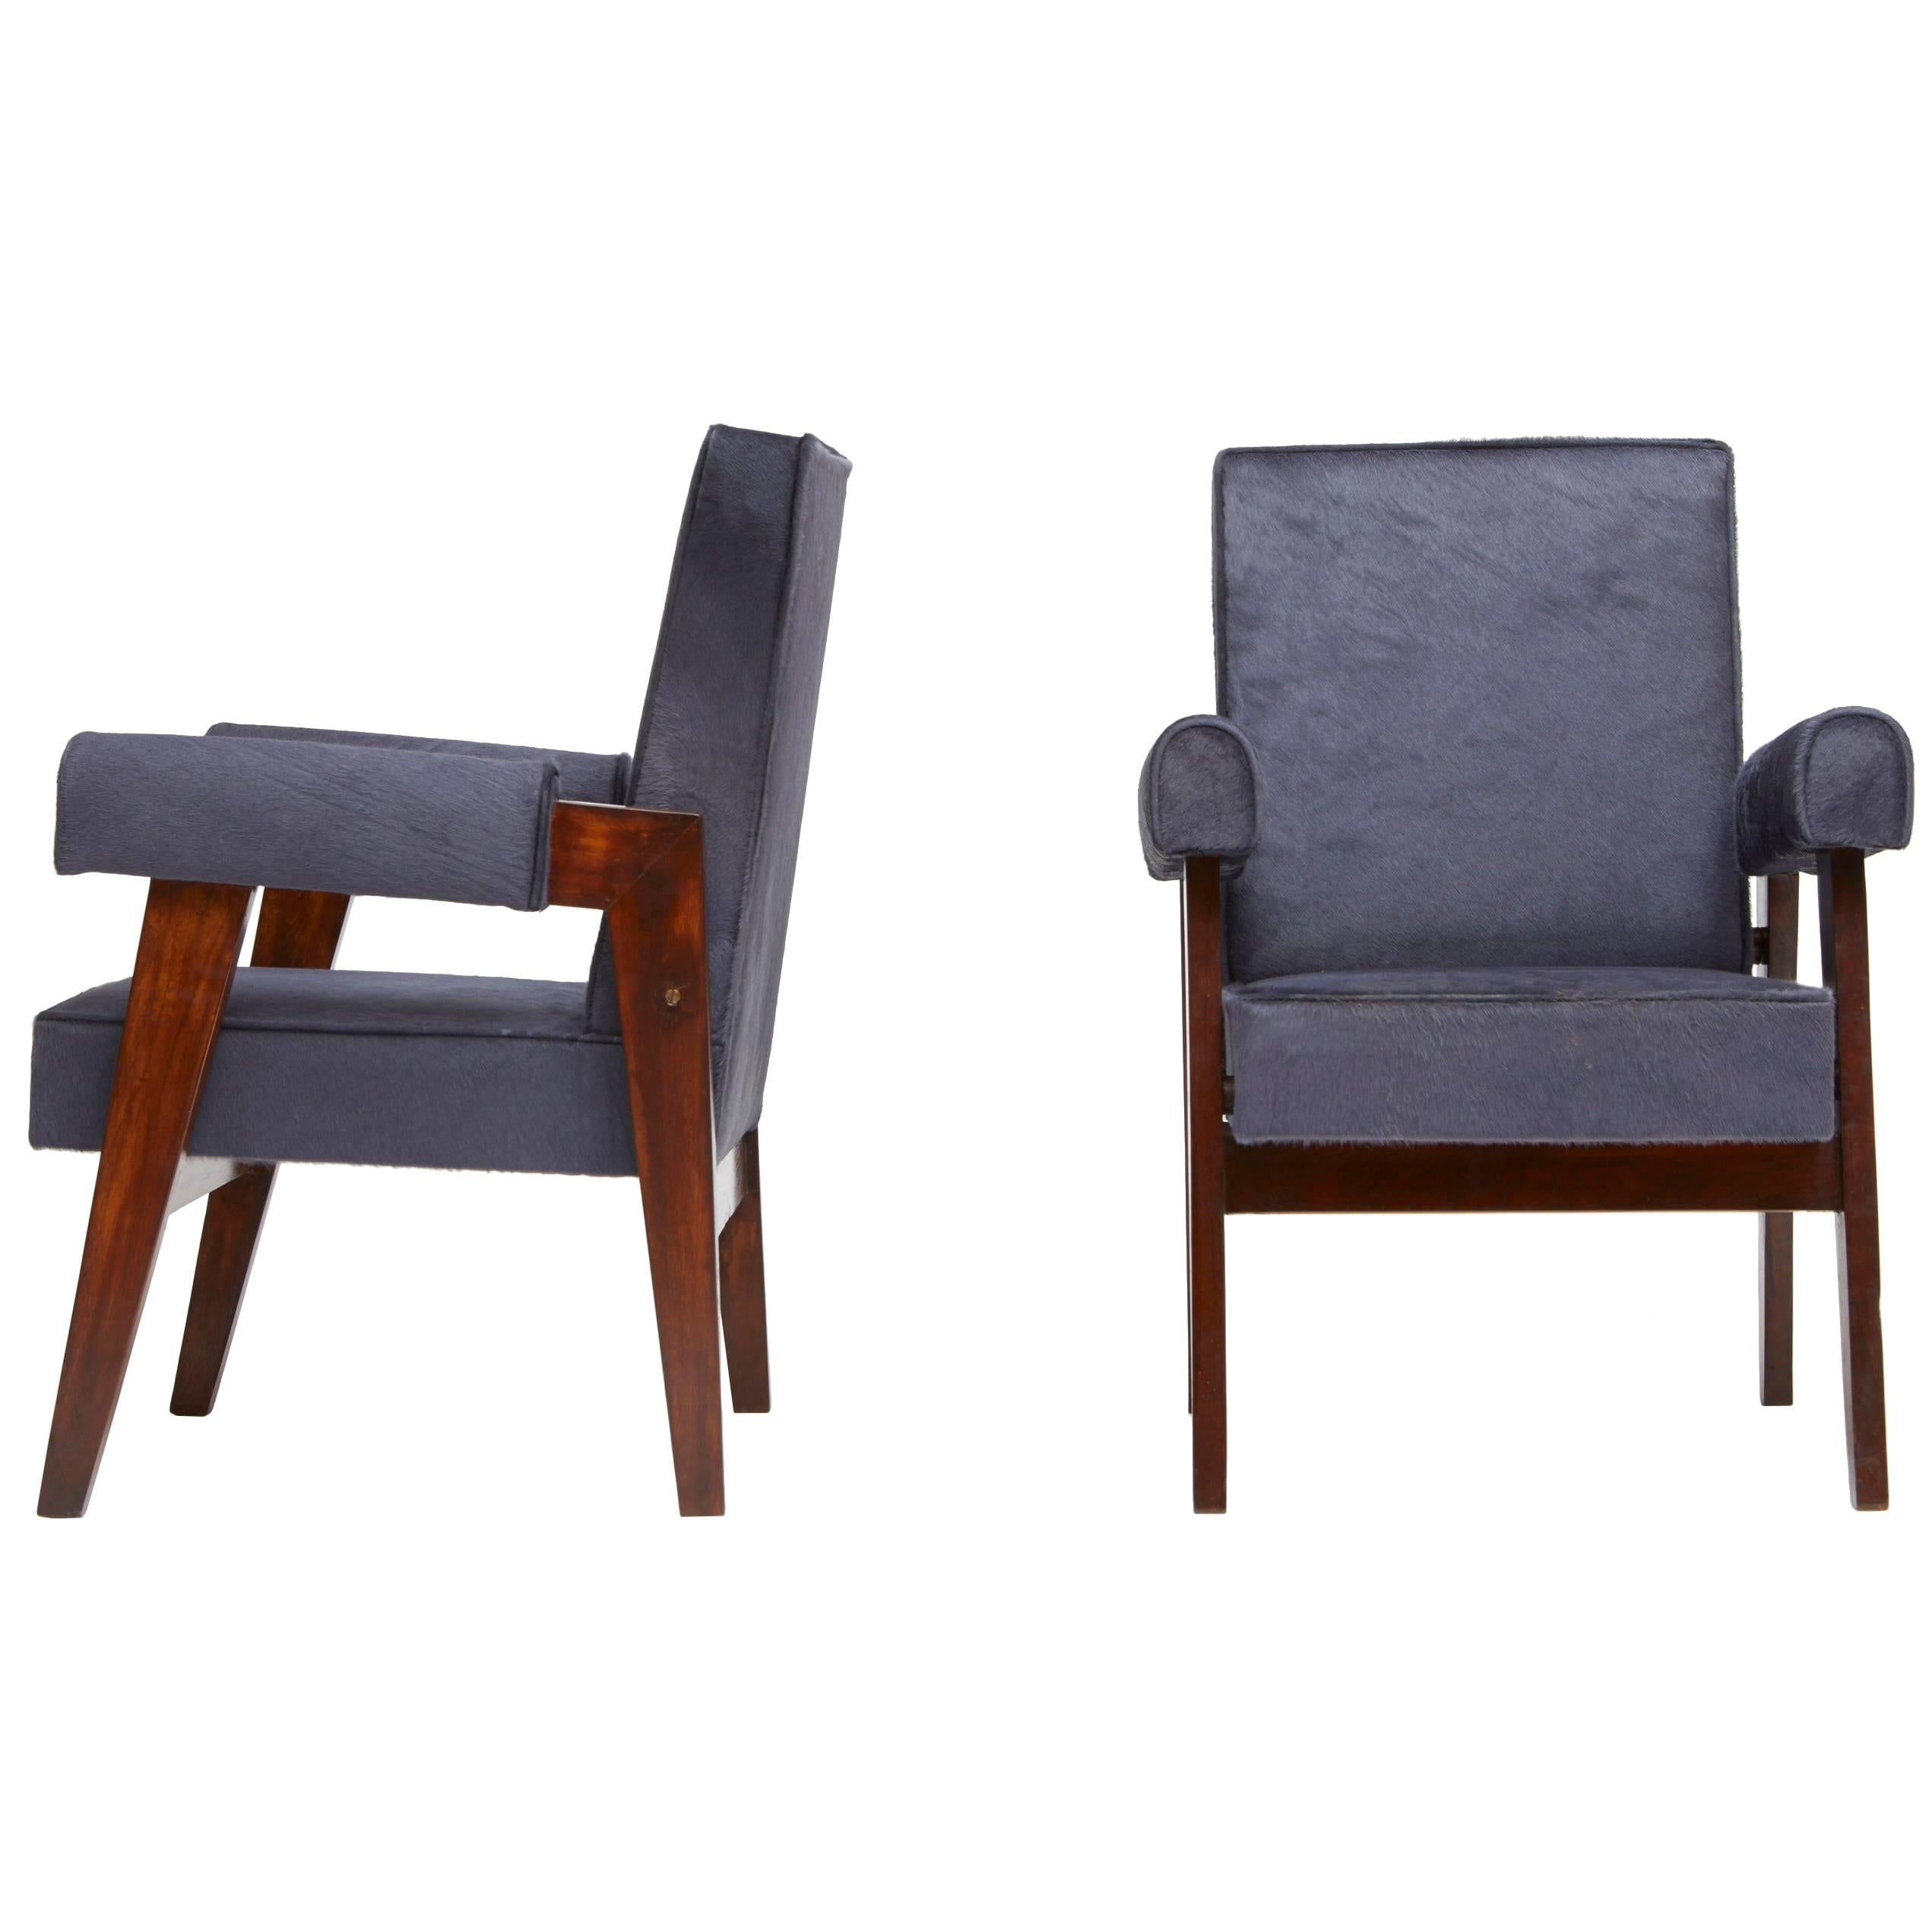 Pierre Jeanneret, Pair of Advocate and Press Chairs